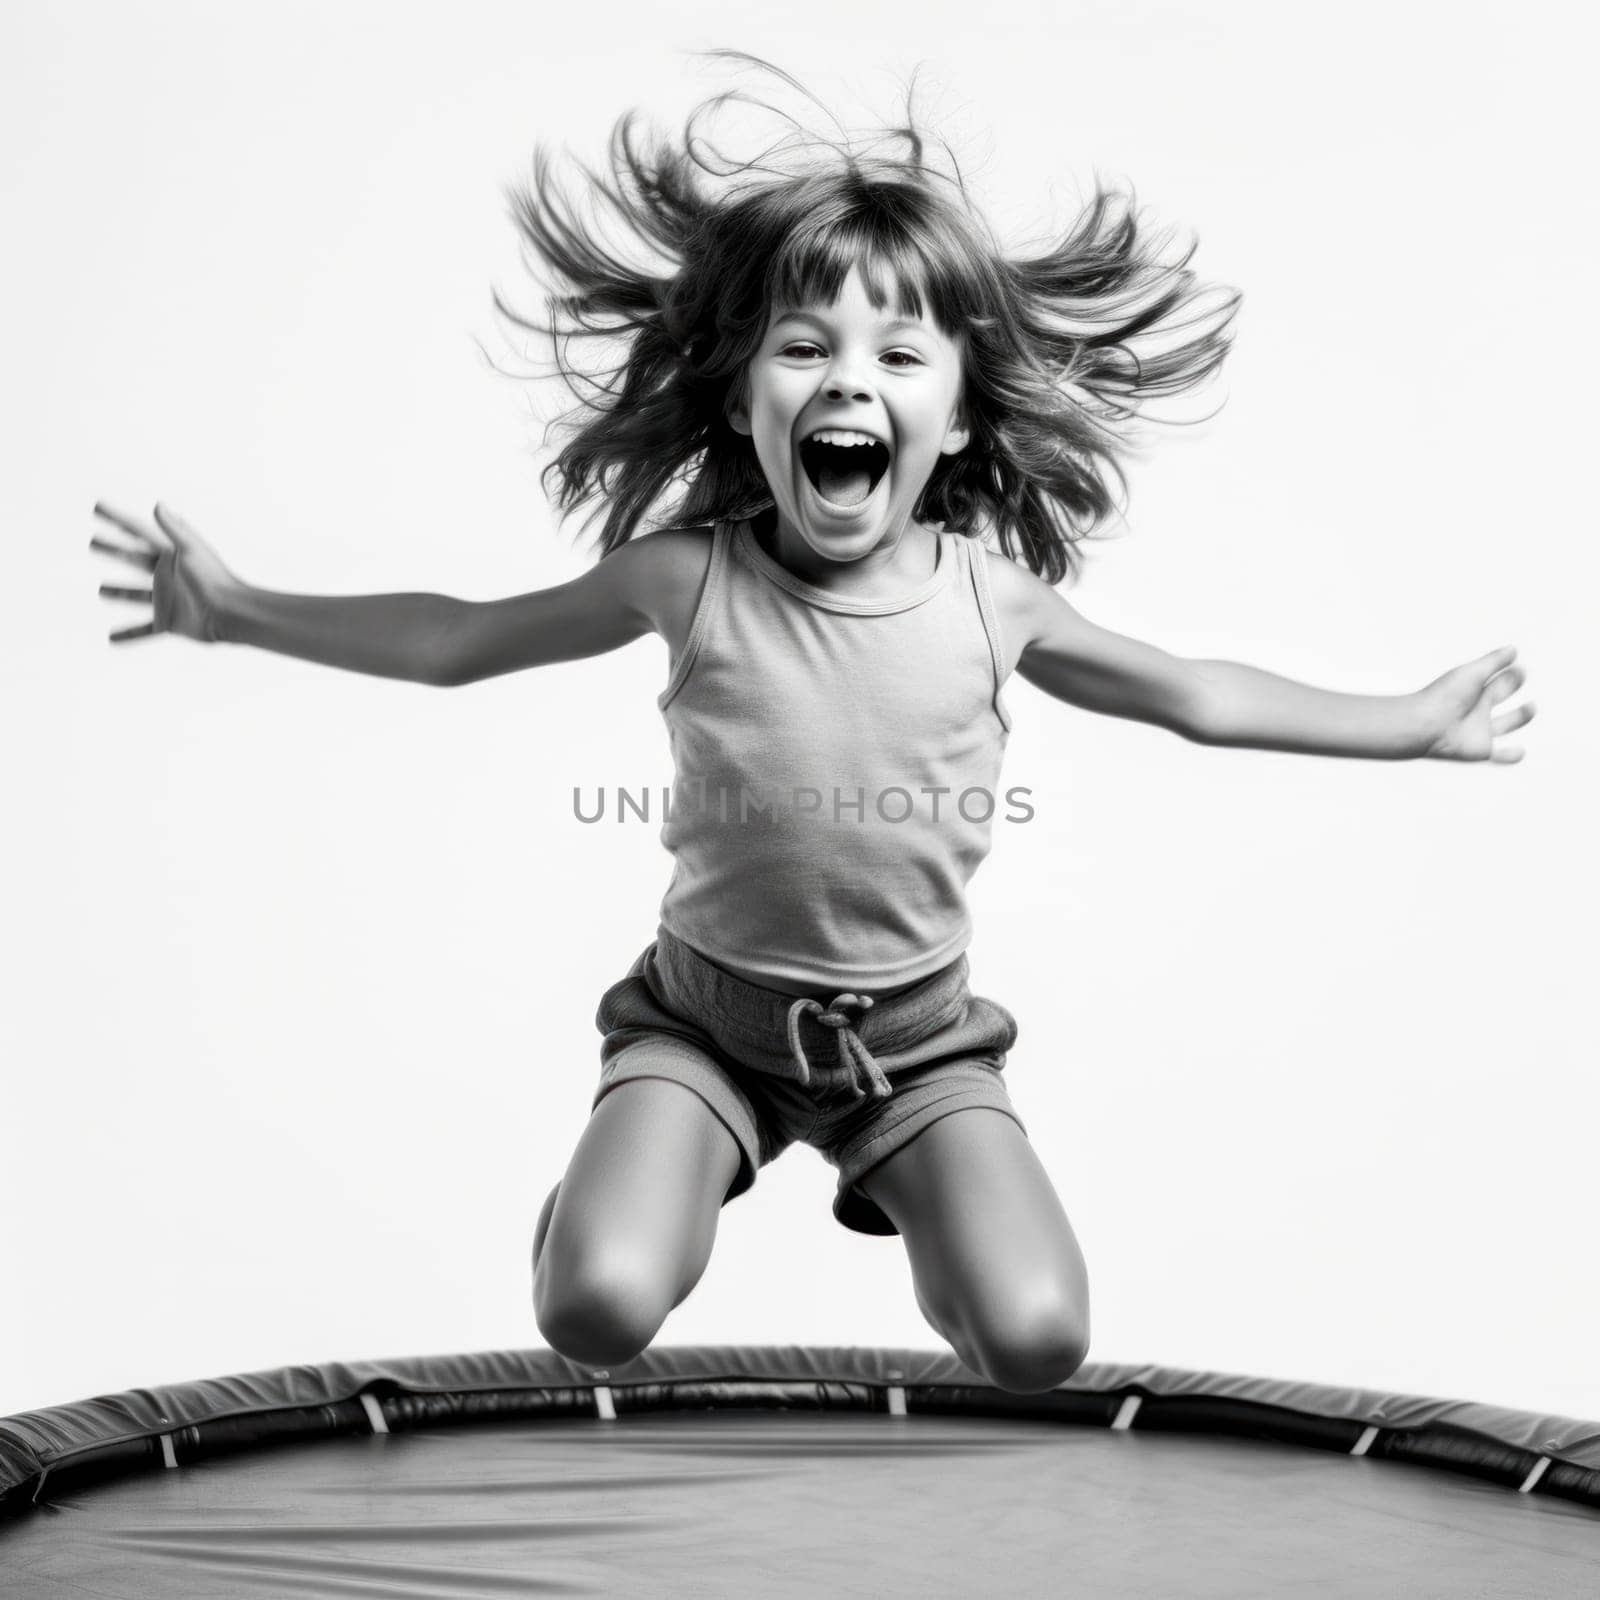 A little girl jumping on a trampoline in the air, AI by starush